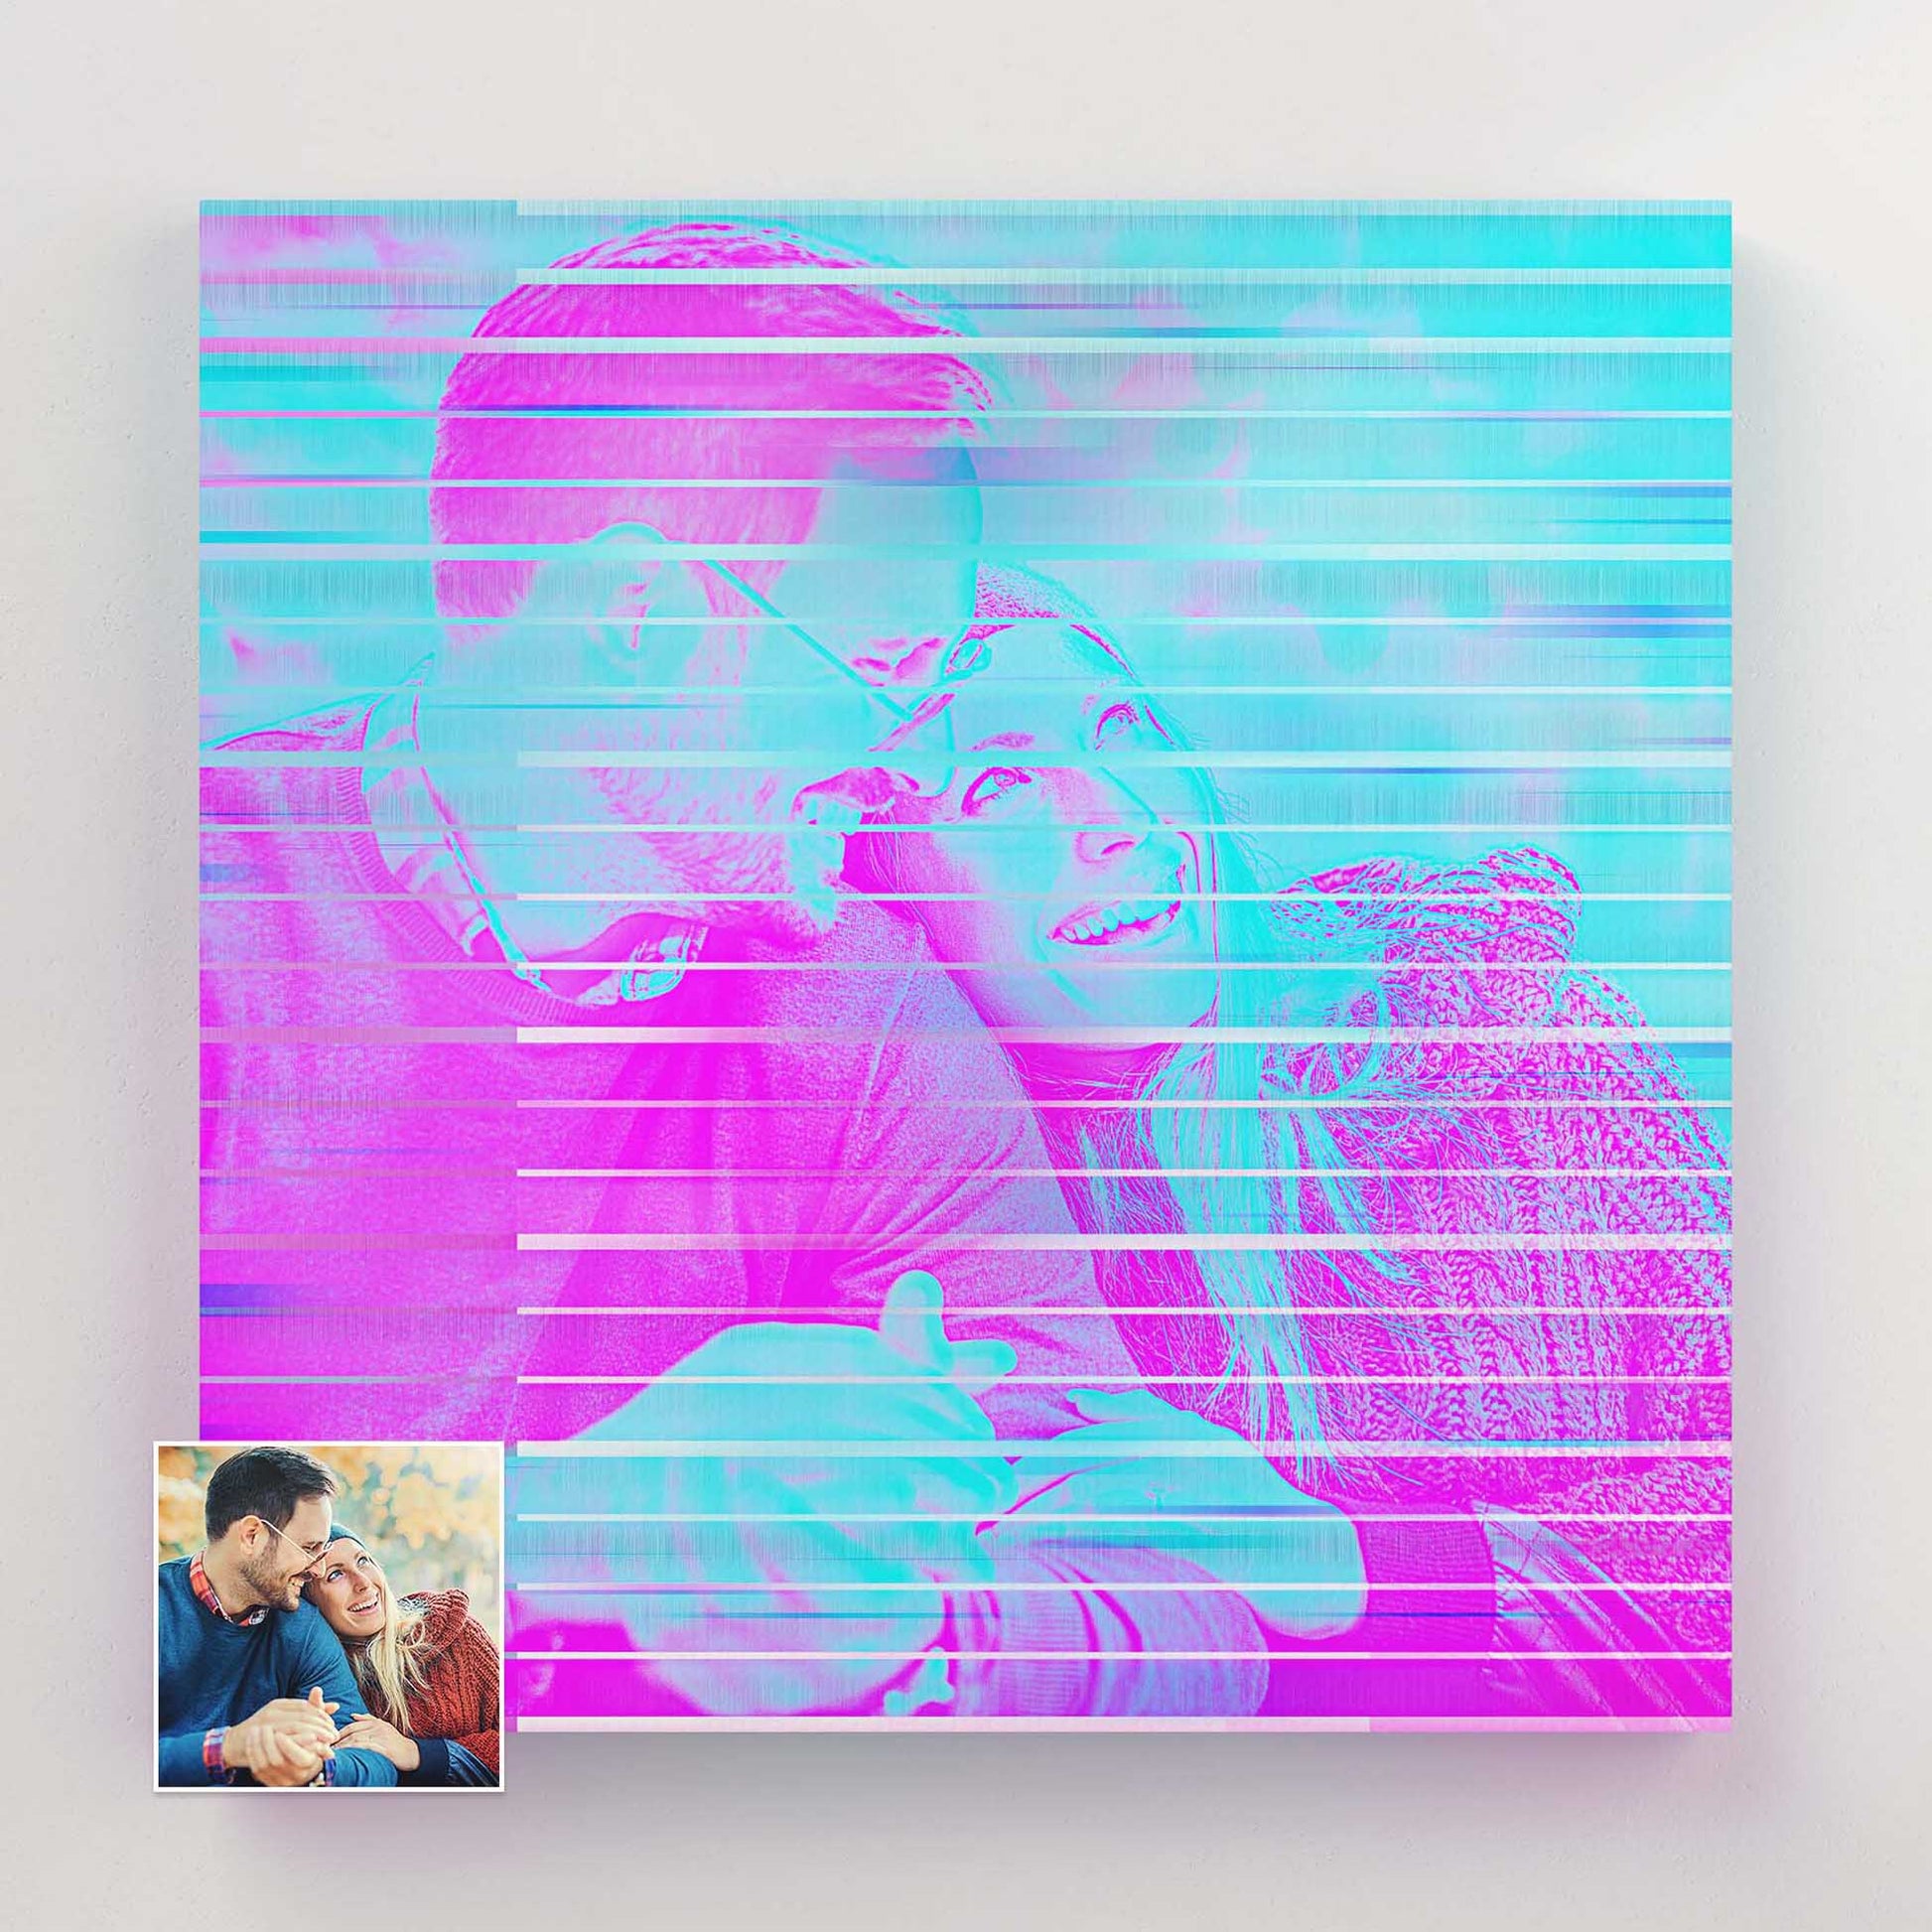 Add a pop of color and style to your home decor with our Personalised Purple & Blue Canvas. Using a painting from photo technique, we create a unique and personalized artwork that captures the essence of your favorite moments